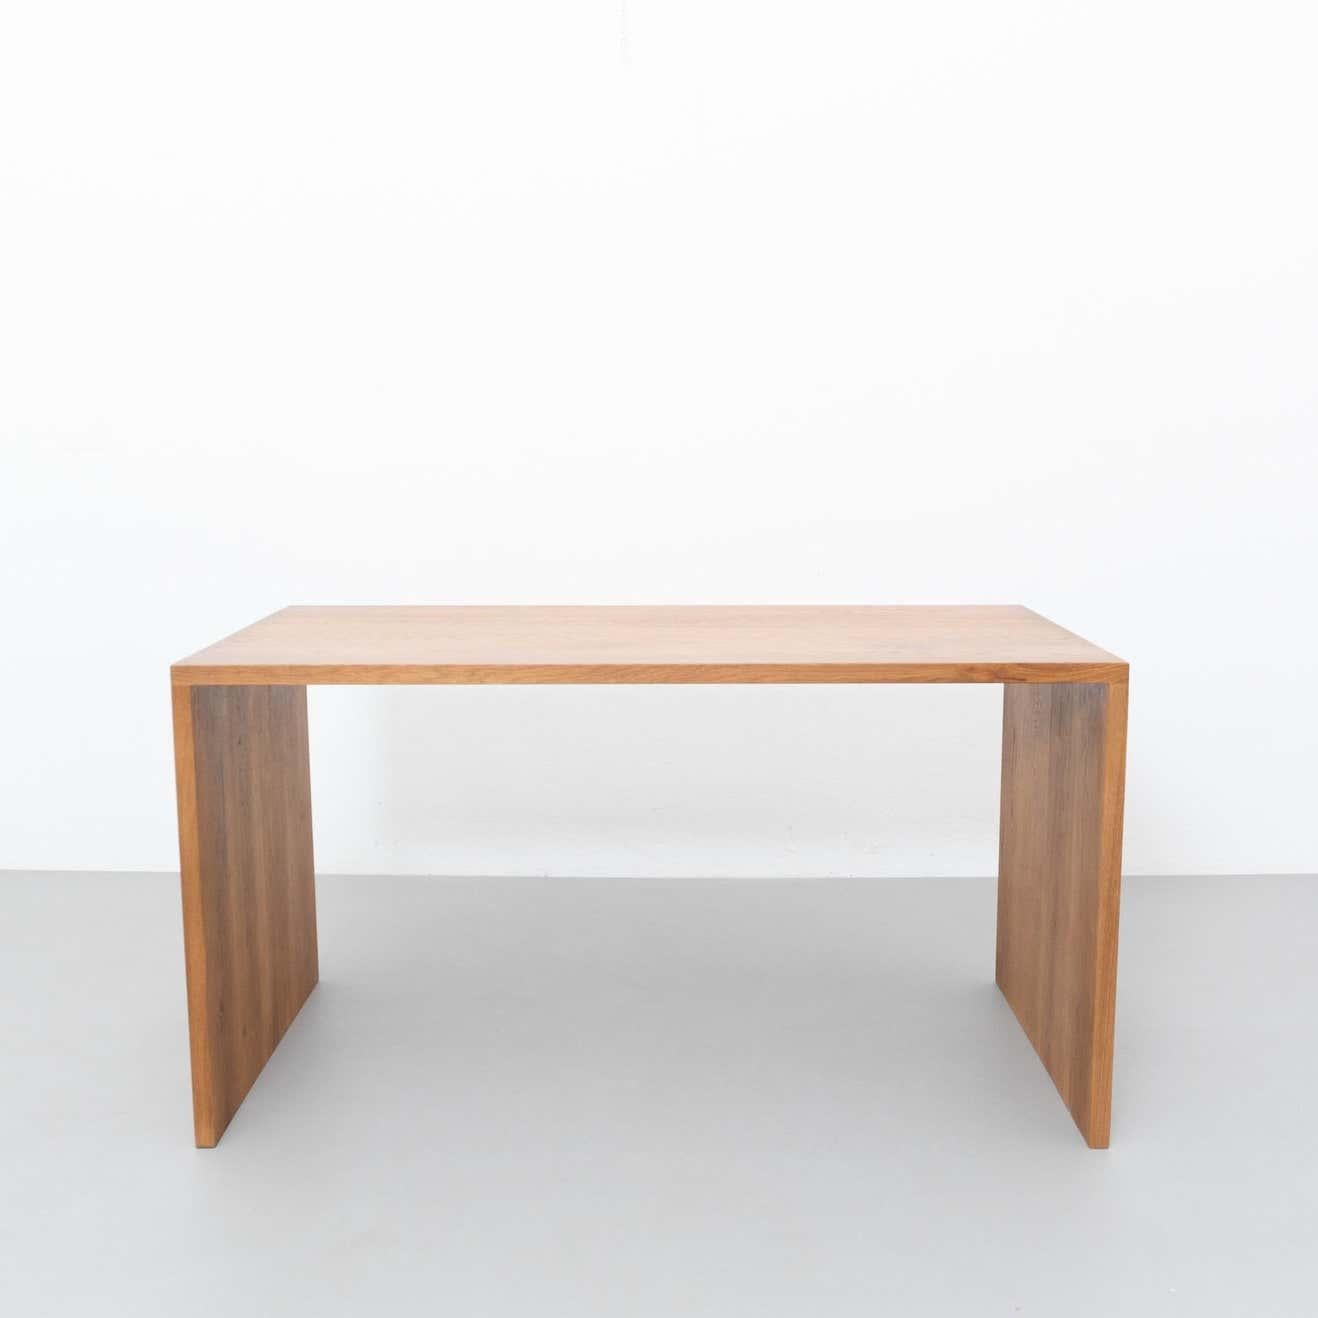 Table by Dada est. manufactured in Barcelona, 2021.

Material: Oak
Dimensions: 72.5 cm D x 140 cm W x 72.5 cm H 

Production delay: 8-9 weeks

There is the possibility of making it in different measures and woods.

Dada Est. Makes a